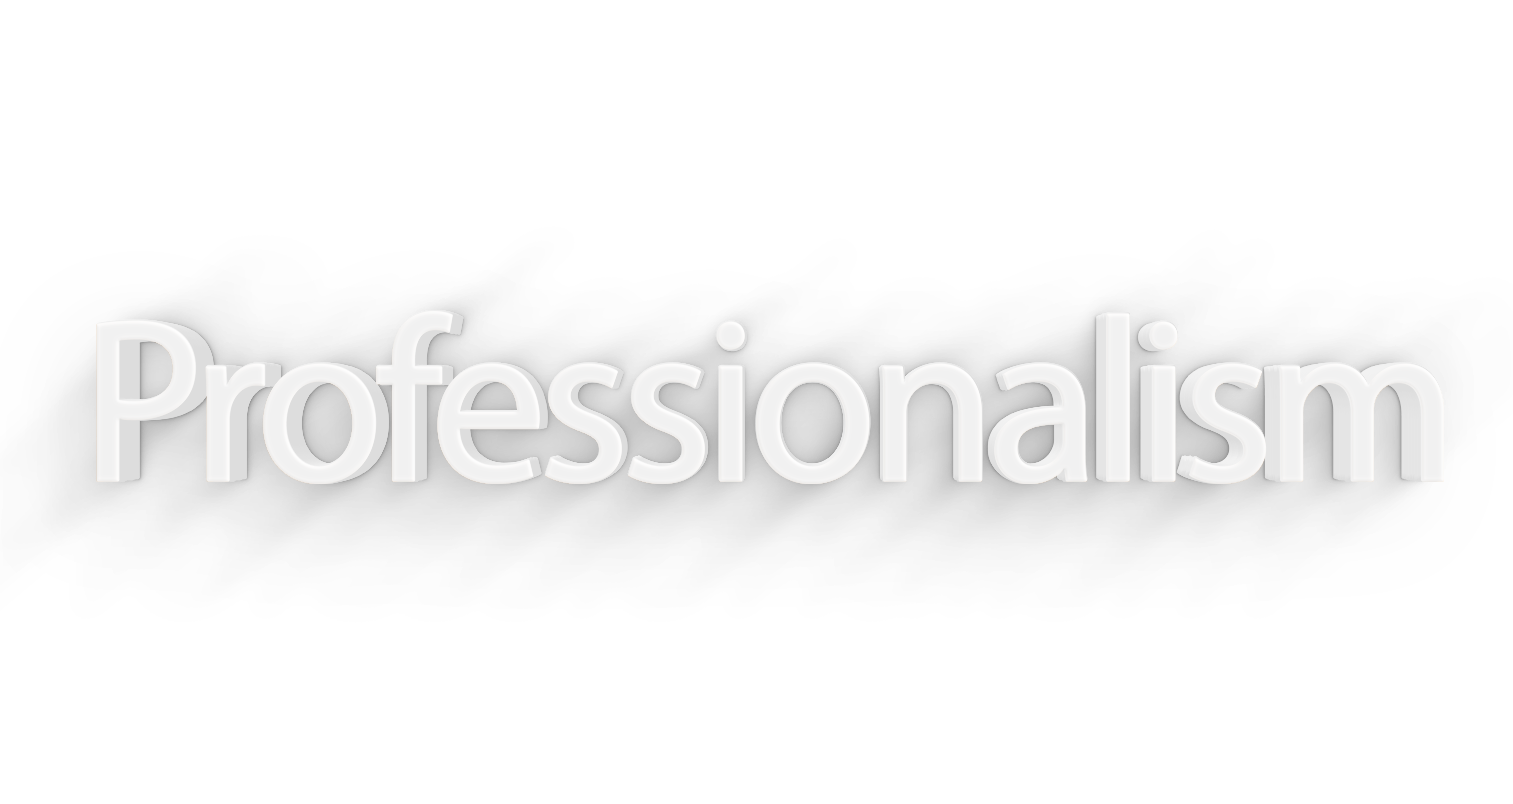 Professionalism png, word Professionalism png, Professionalism word png, Professionalism text png, Professionalism font png, word Professionalism text effects typography PNG transparent images